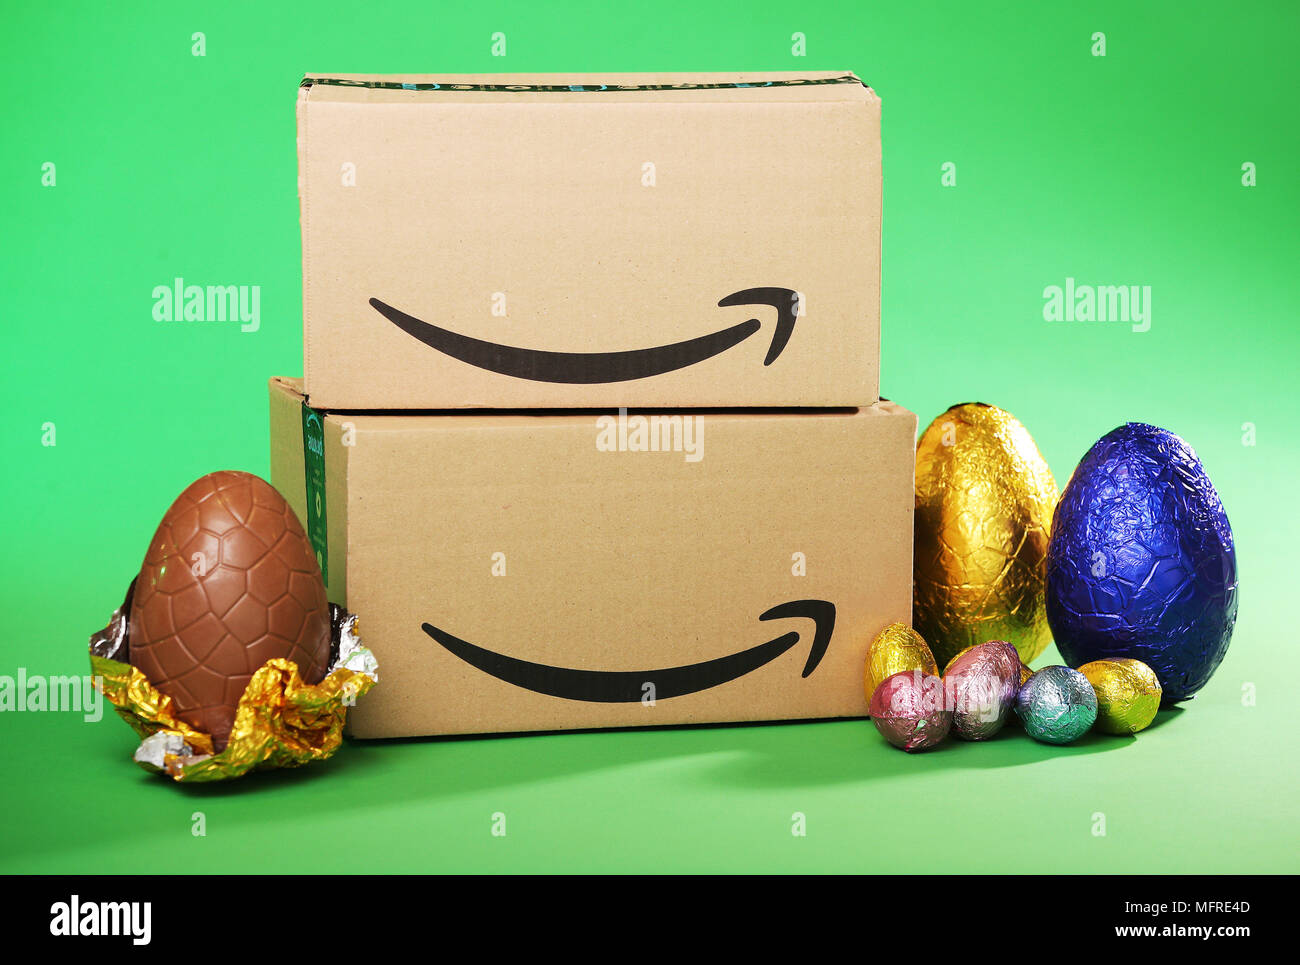 The Amazon.co.uk Early Easter Sale will run until 23:59 on Monday 26th March, throughout the sale new ‘Deals of the Day’ have been available every 24 hours throughout the period including everything from the latest consumer electronics and Amazon devices to must-have Easter eggs, toys, games, fashion, beauty, home items and more. Britannia is out on DVD/Blu-ray from Monday 26th March 2018  Where: United Kingdom When: 21 Mar 2018 Credit: Joe Pepler/PinPep/Amazon.co.uk/WENN.com Stock Photo